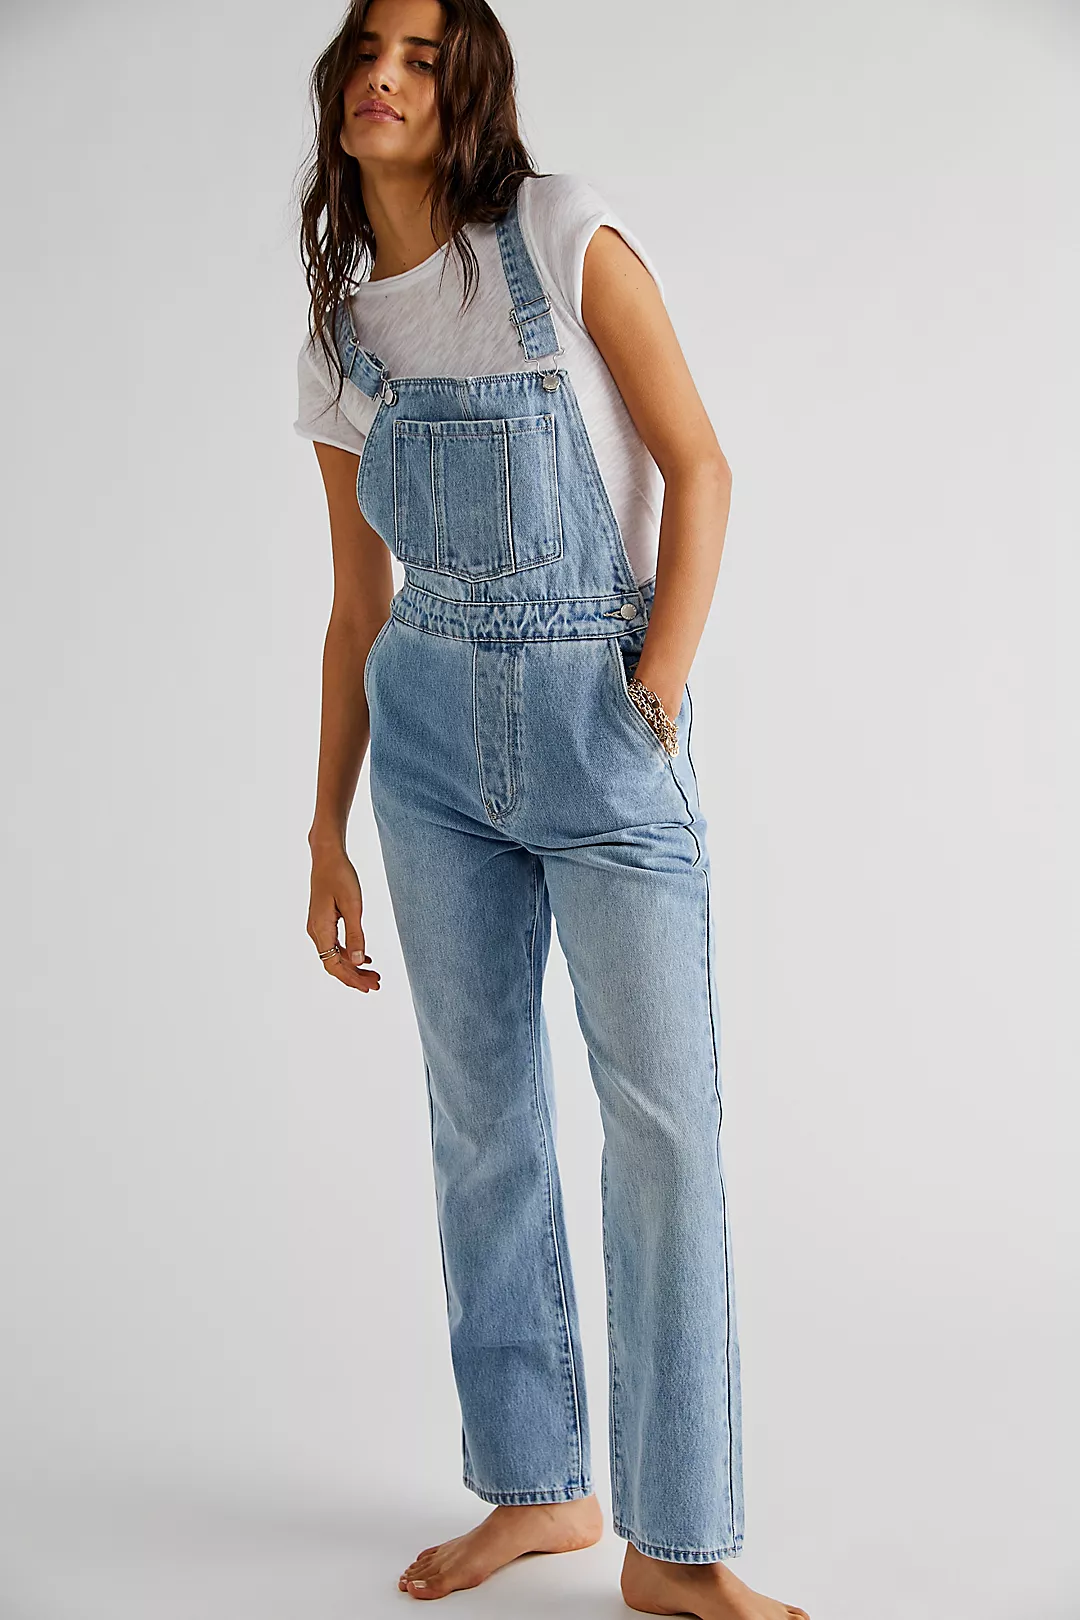 8 New Denim Overalls Styles To Try This Year 2024 - Asattractive